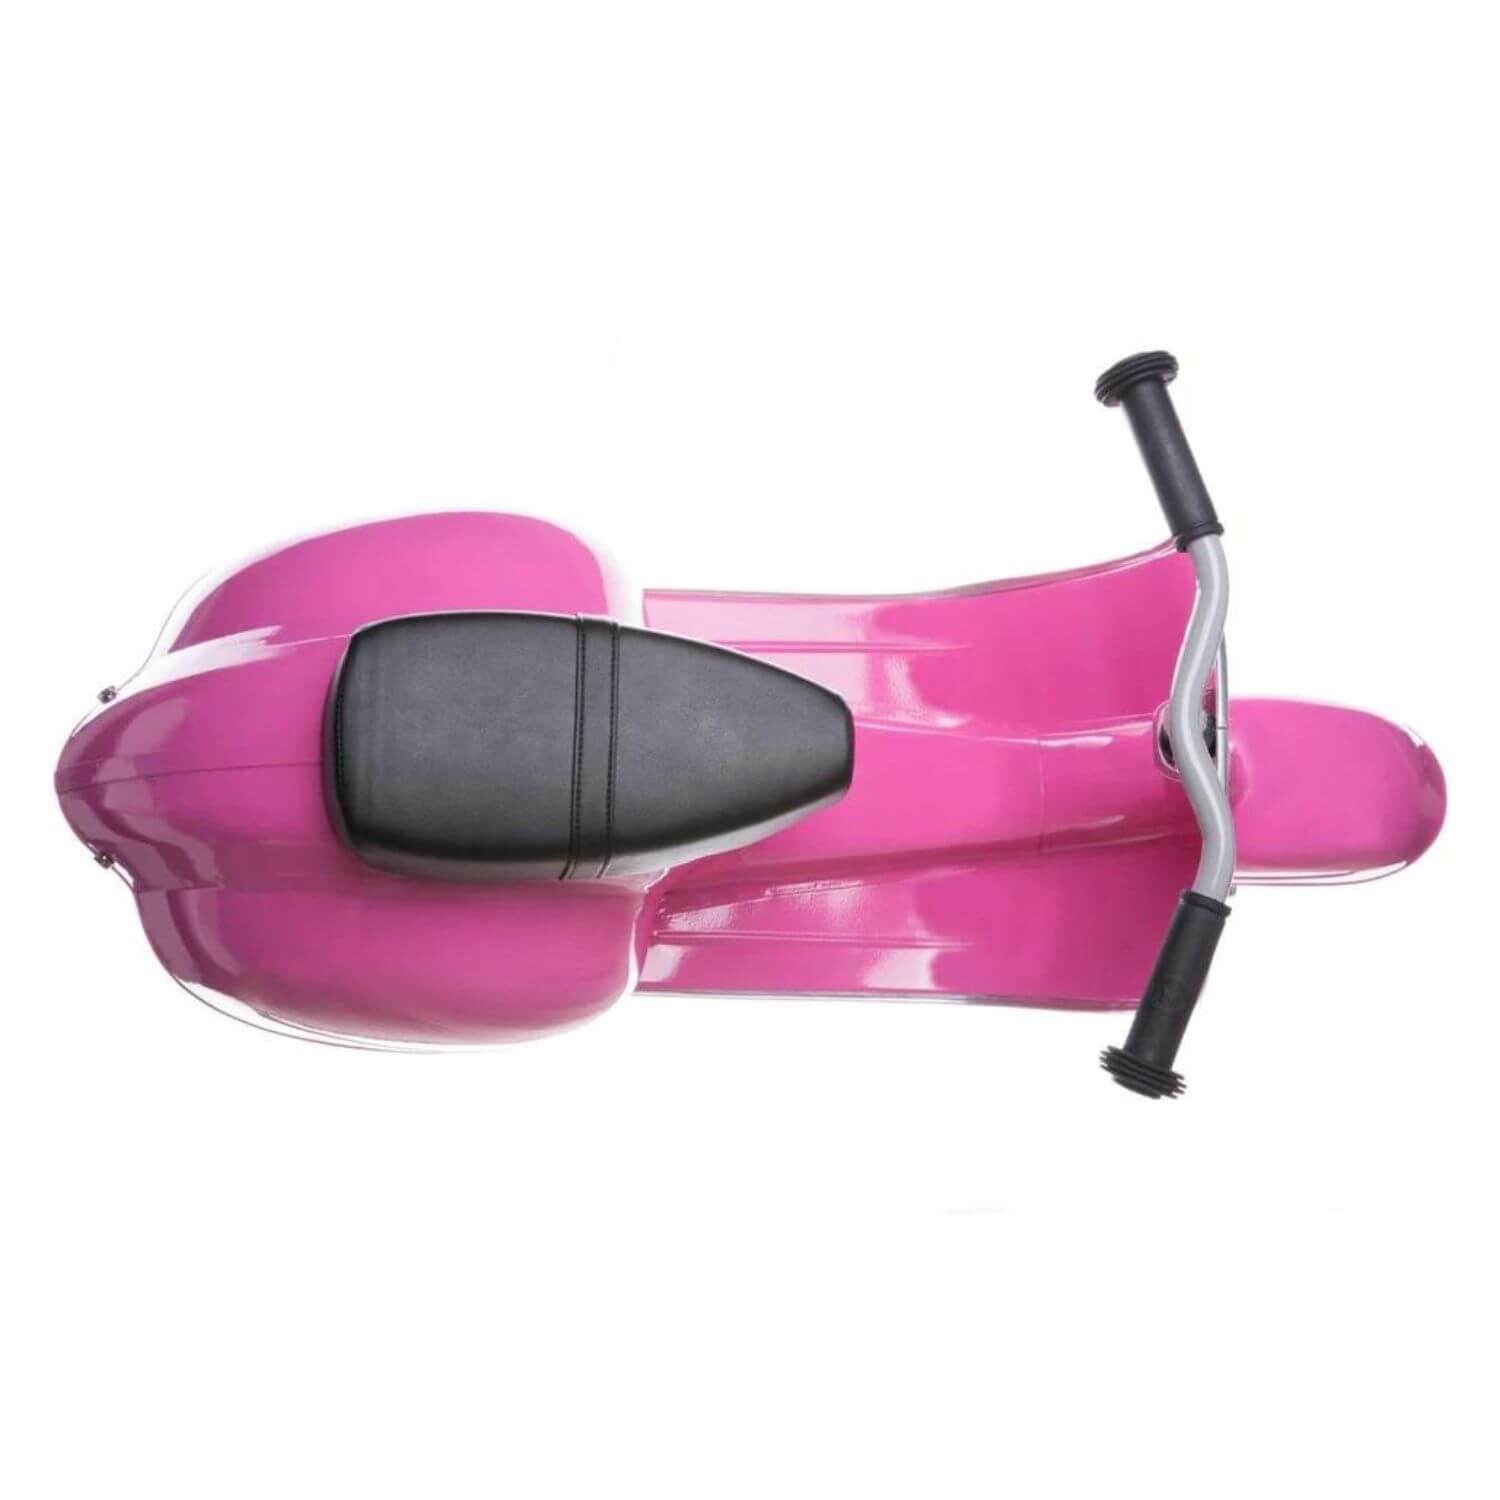 Primo Classic Ride-On Scooter Pink - Top